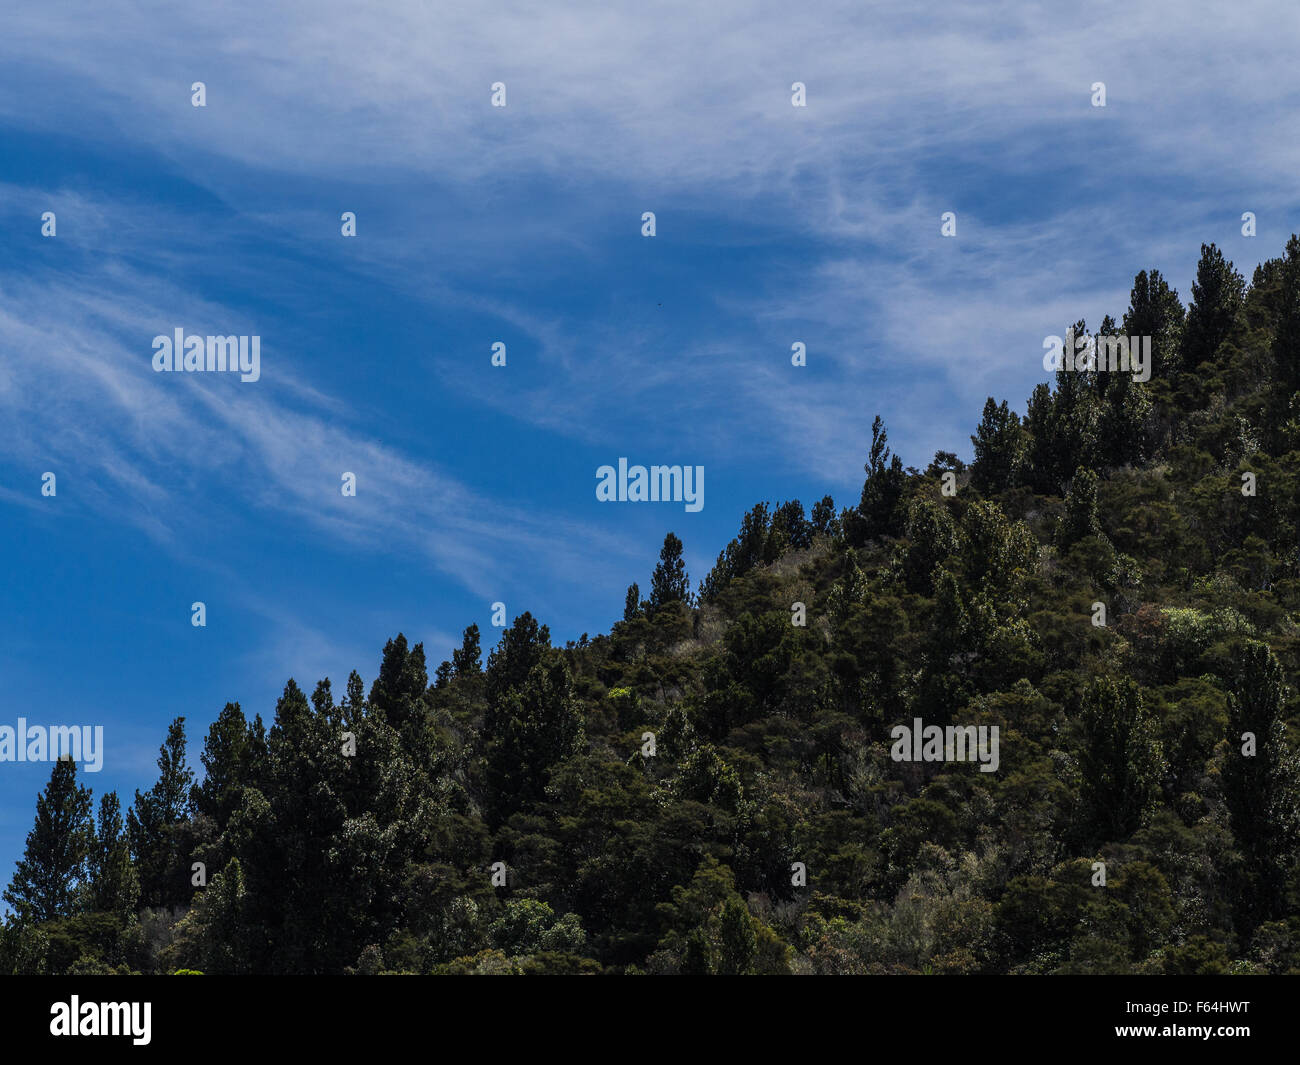 Regenerating native forest on steep hillside with wooded skyline and streaks of cloud in blue sky. Stock Photo